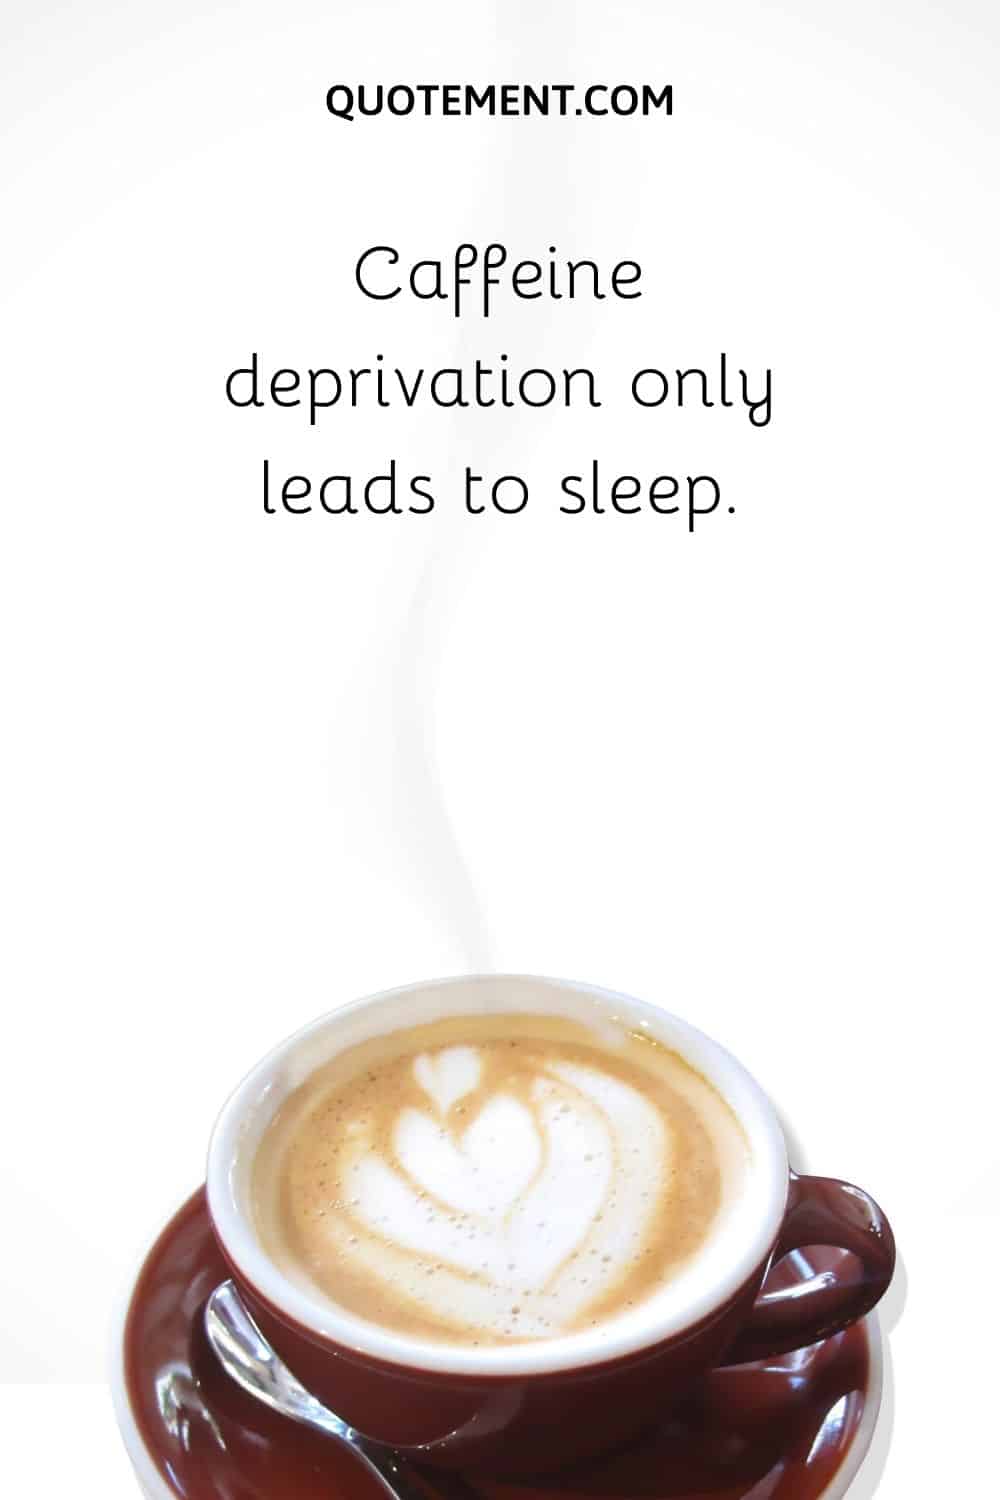 Caffeine deprivation only leads to sleep